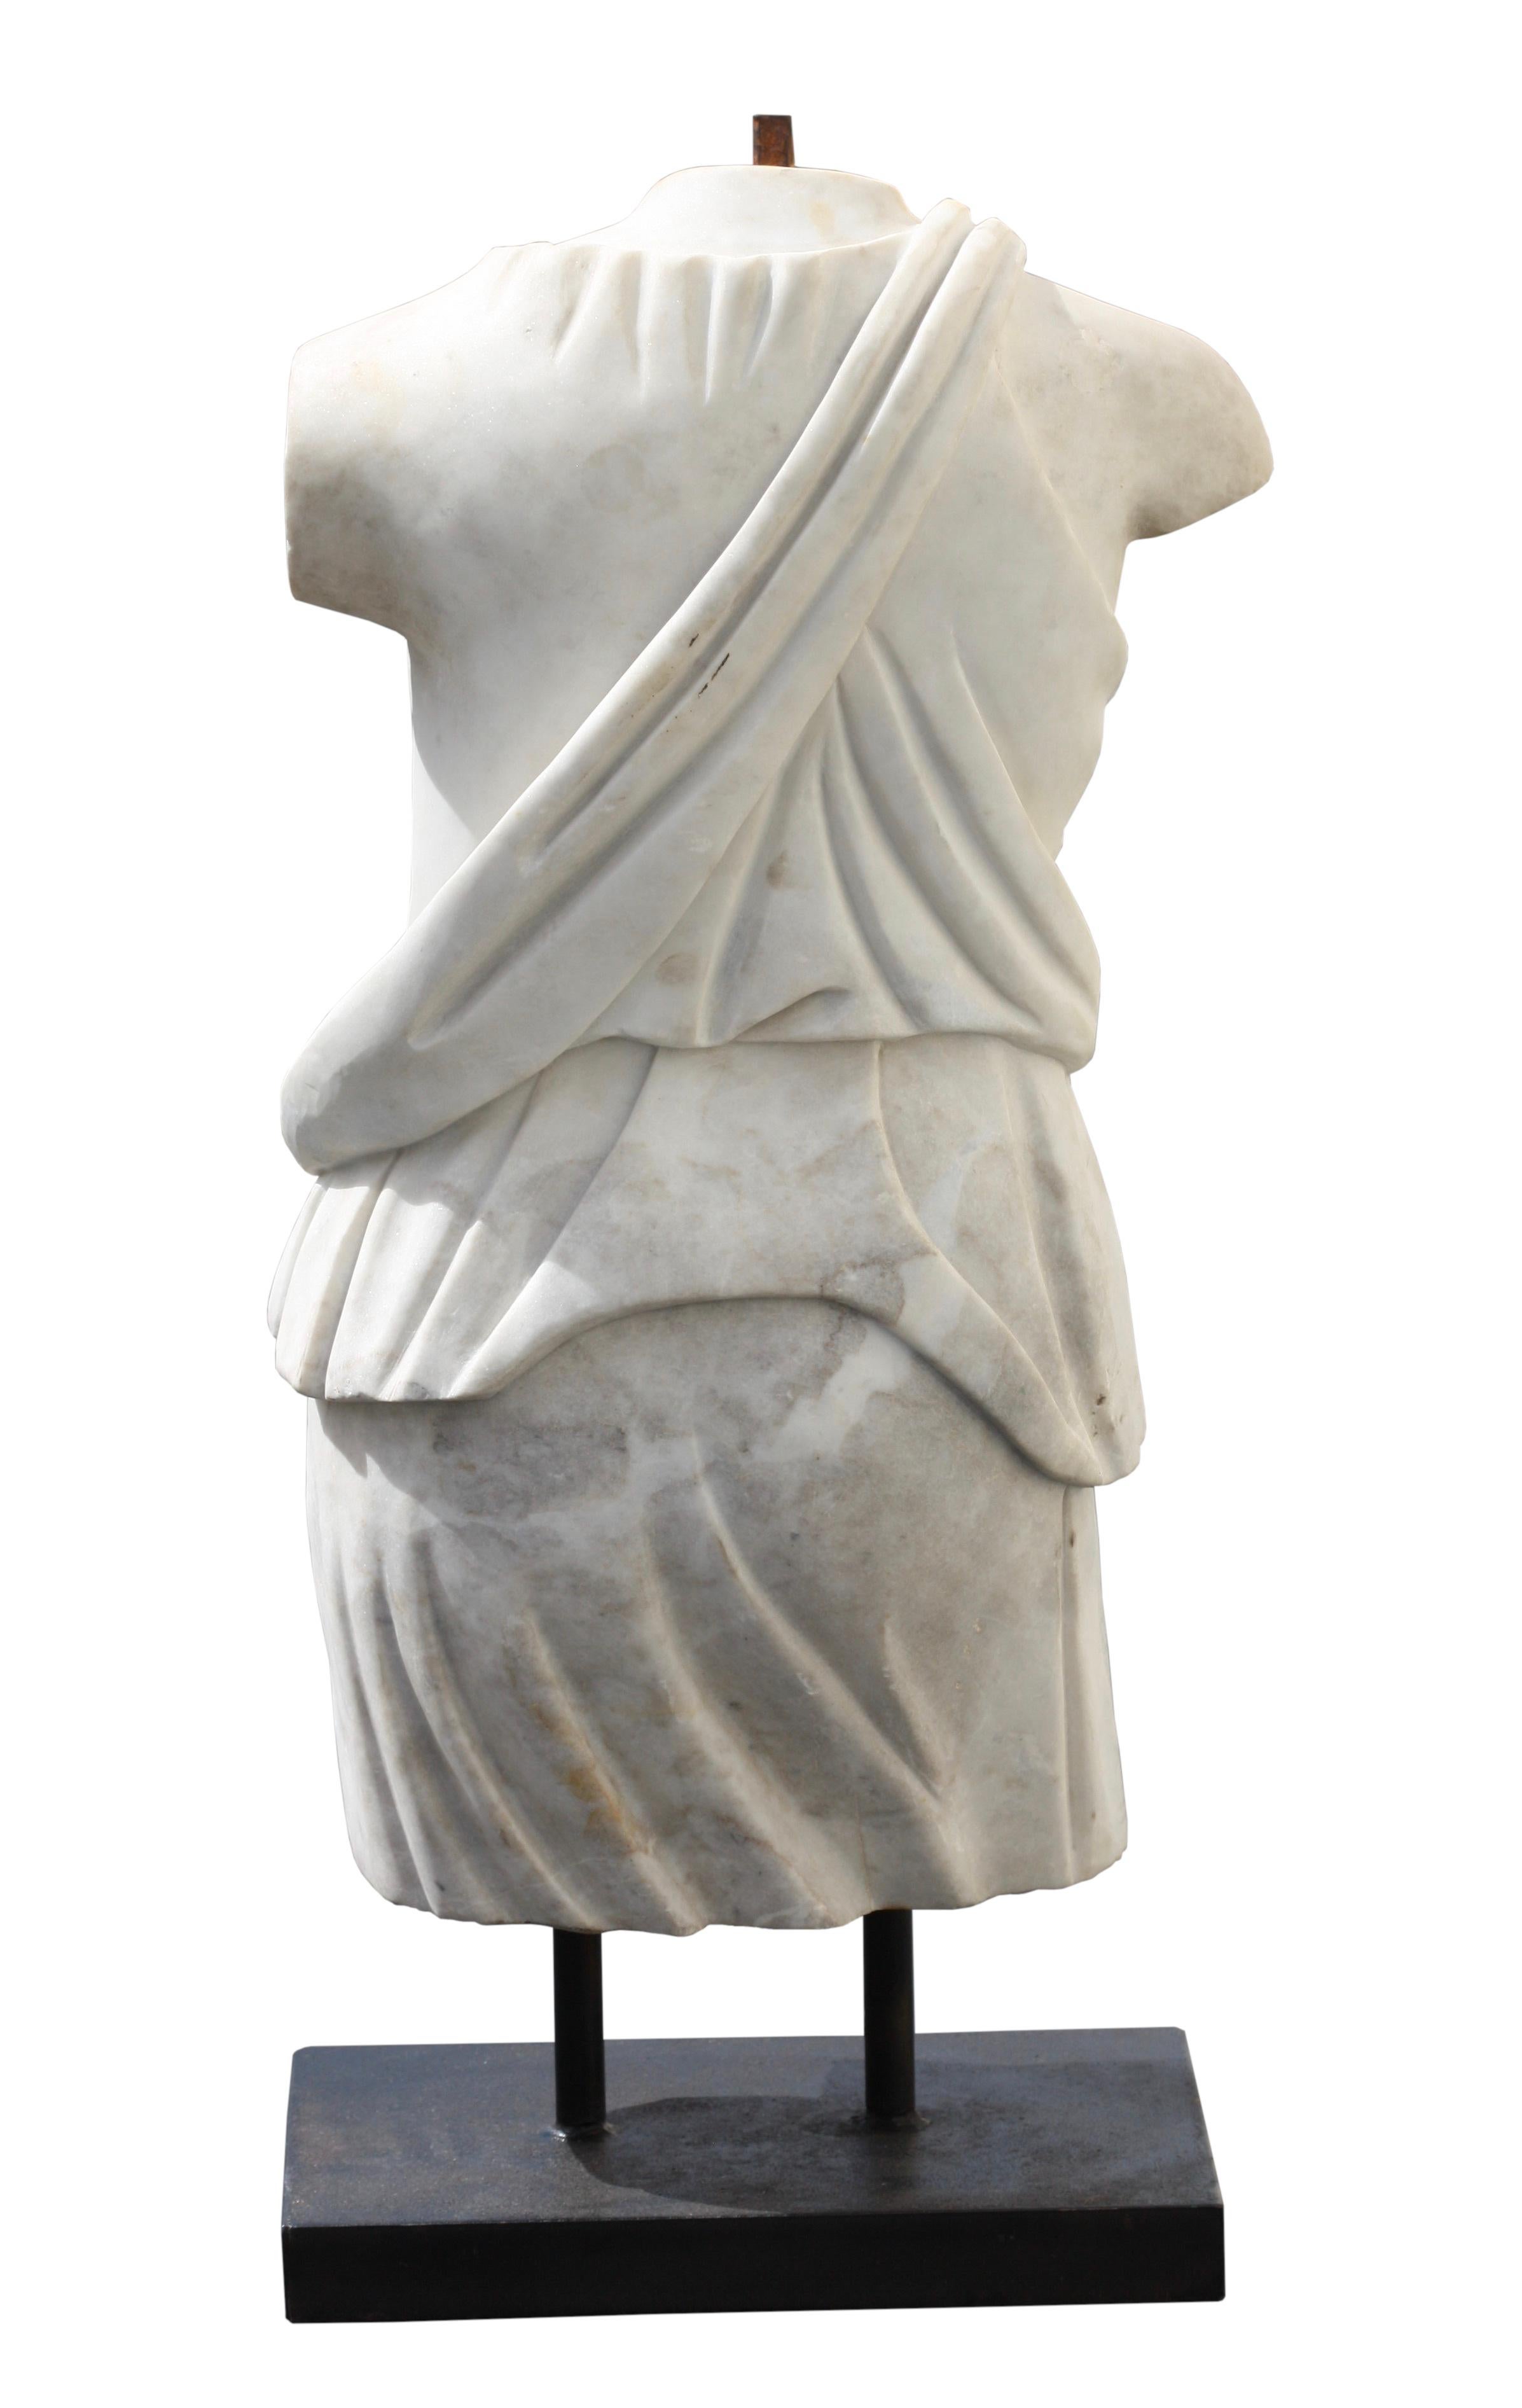 An Italian marble figure of a torso, 19th/20th century
wearing a tunic falling from her right shoulder and leaving the breast bare, both ends of the fillet falling over the nape of her neck, on a bronze base, height 81 cm., 32 in.